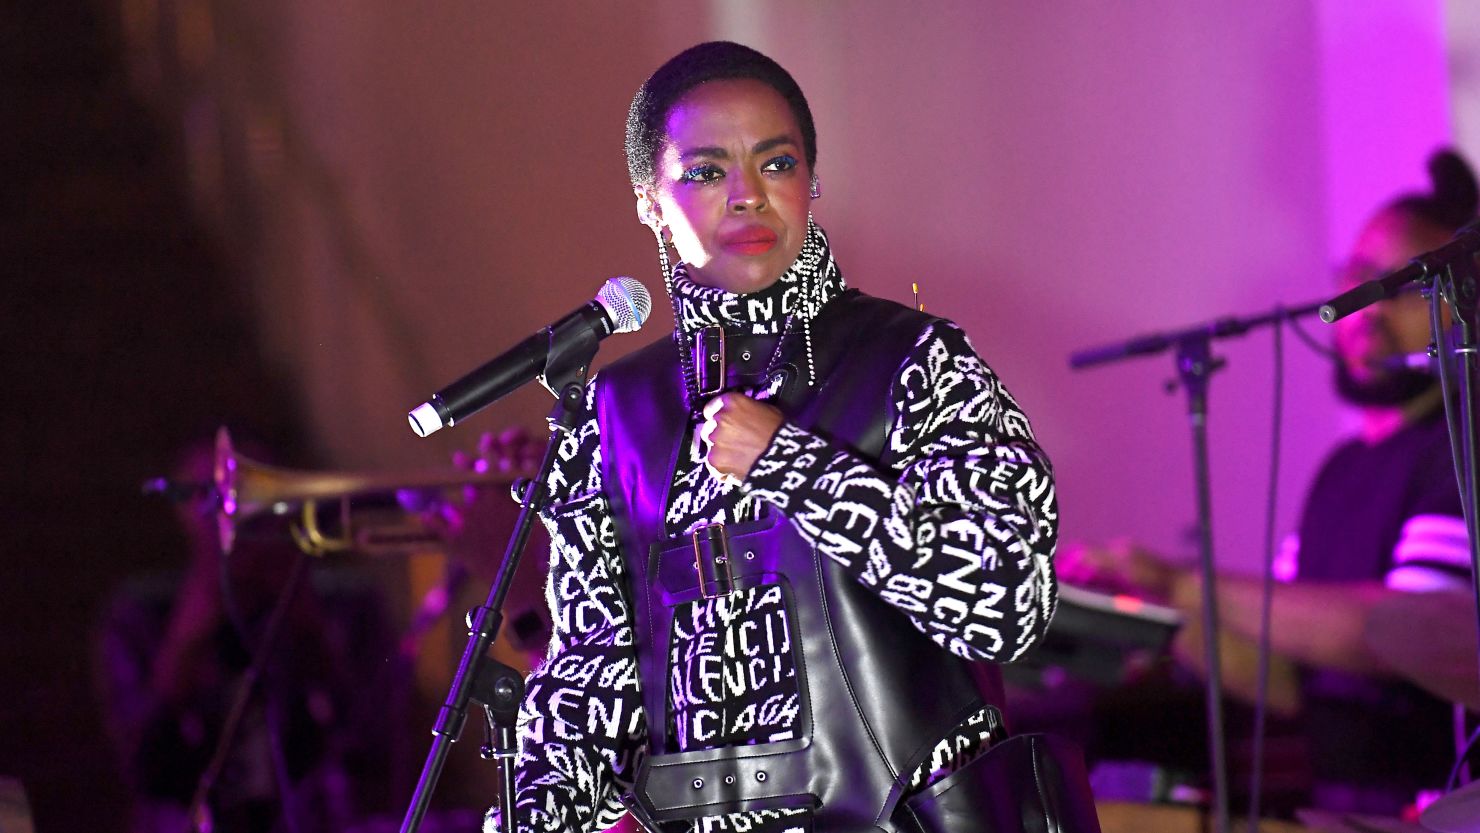 Singer Lauryn Hill posted a lengthy note on her verified Facebook page in response to her daughter's comments.